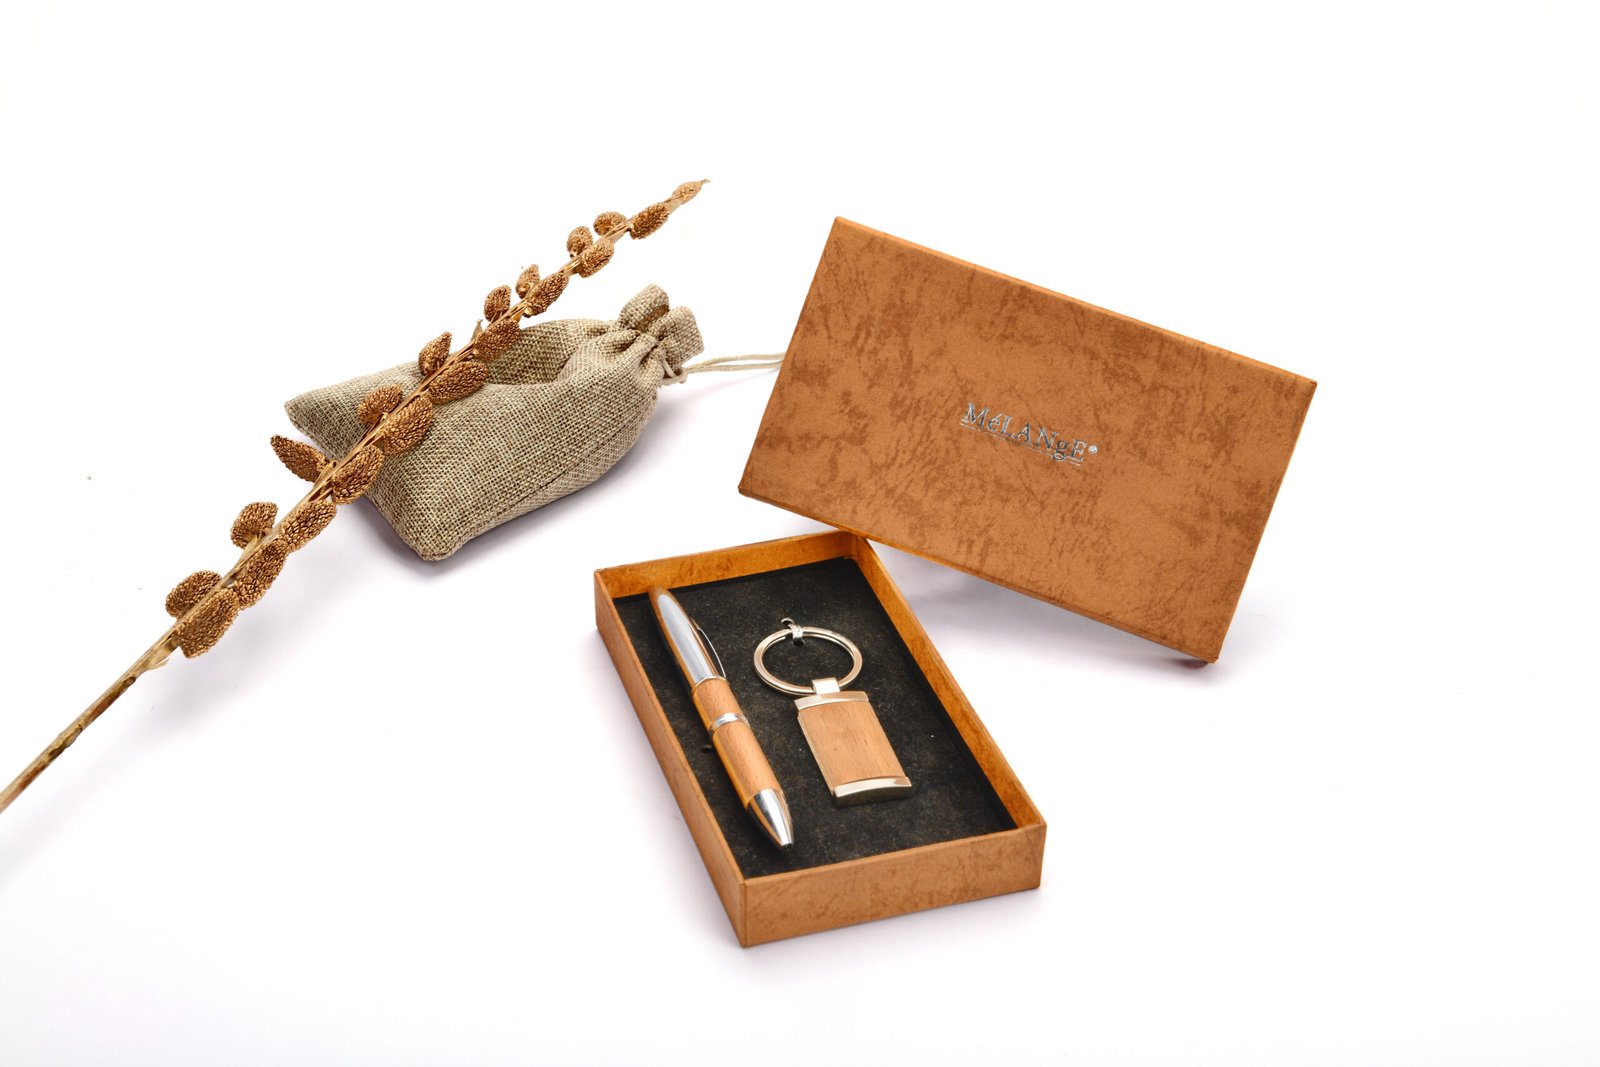 Pen and key chain gift box